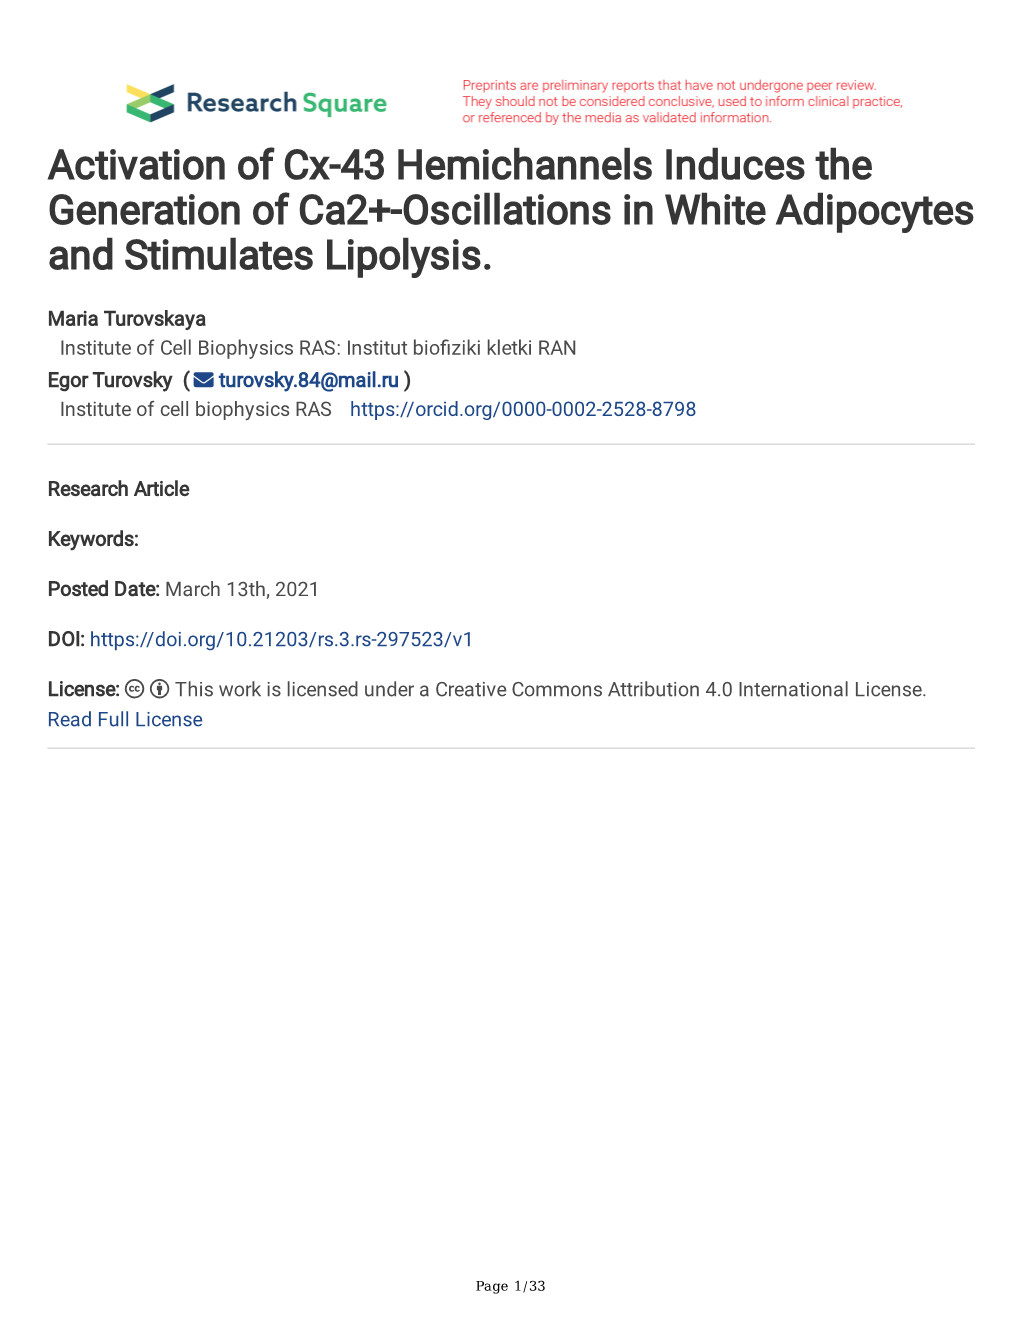 Activation of Cx-43 Hemichannels Induces the Generation of Ca2+-Oscillations in White Adipocytes and Stimulates Lipolysis